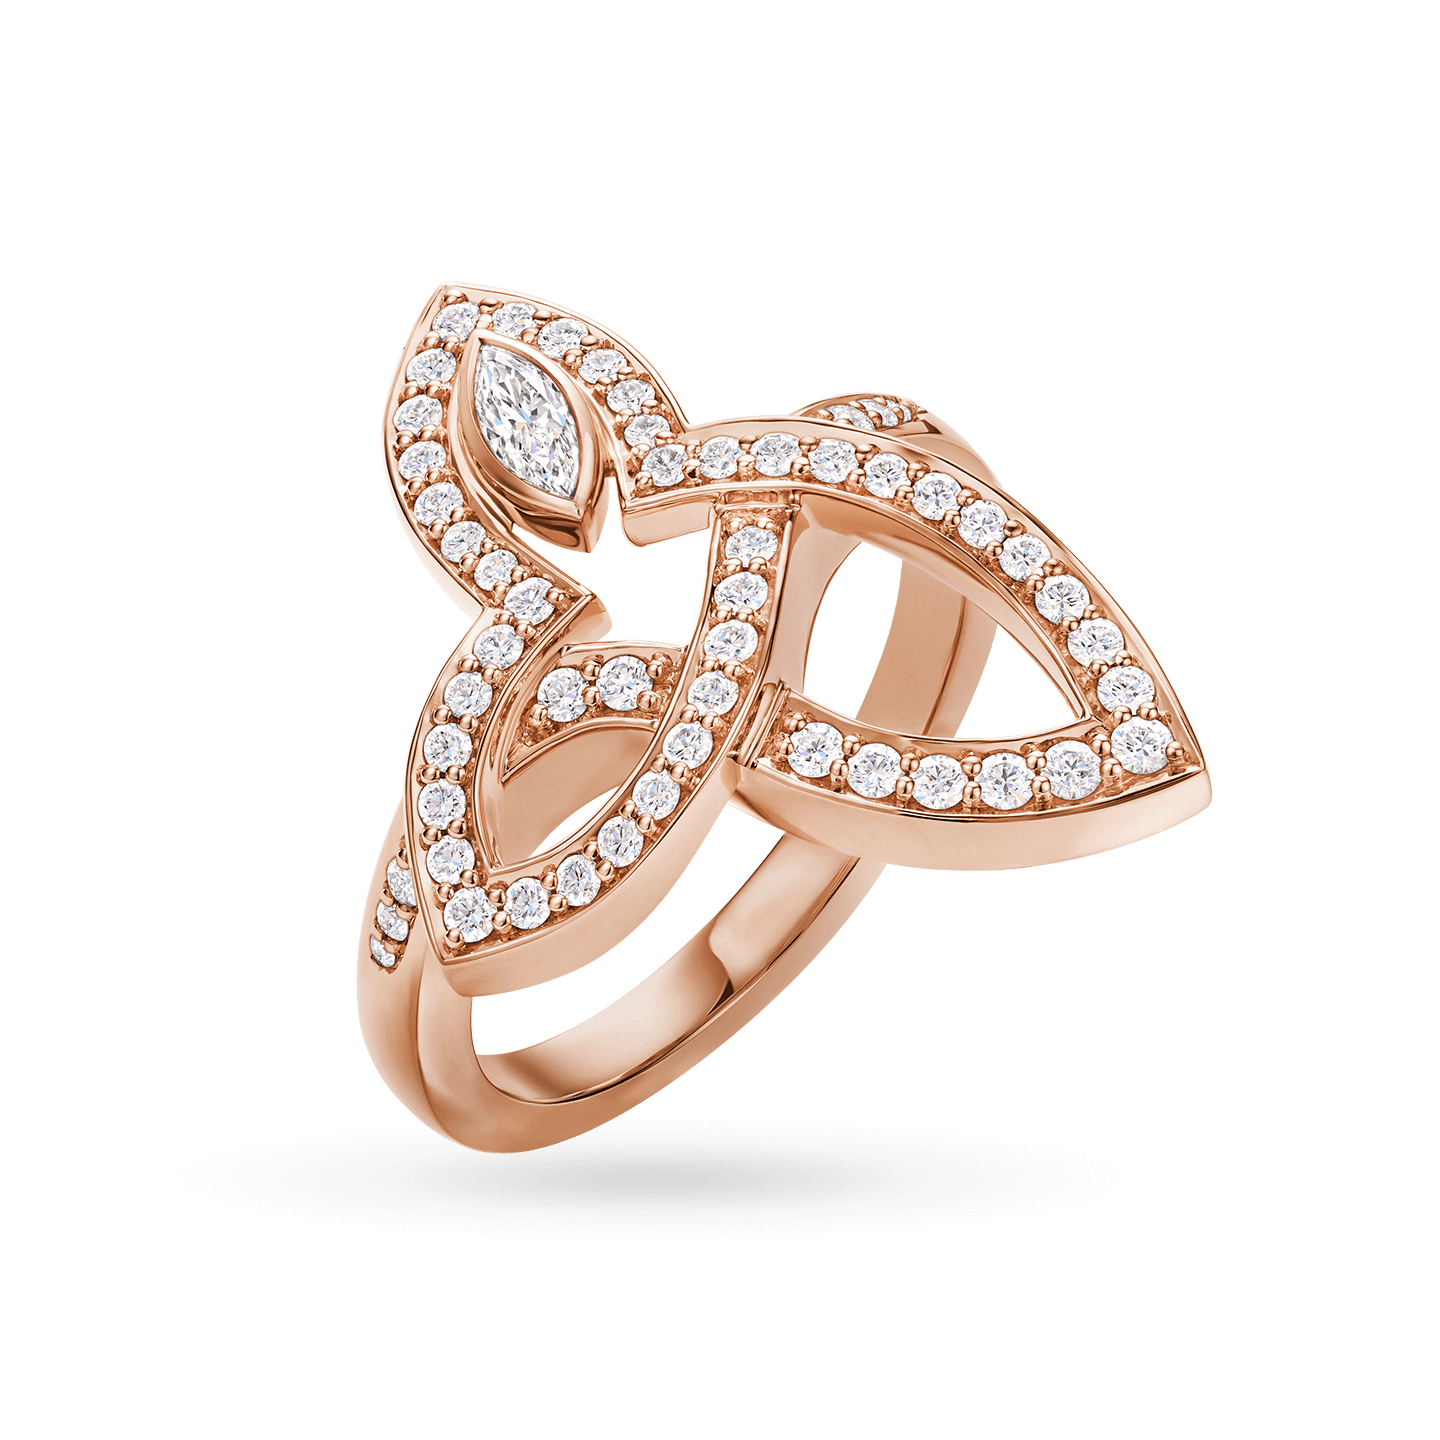 Lily Cluster Diamond Ring in Rose Gold, Product Image 2